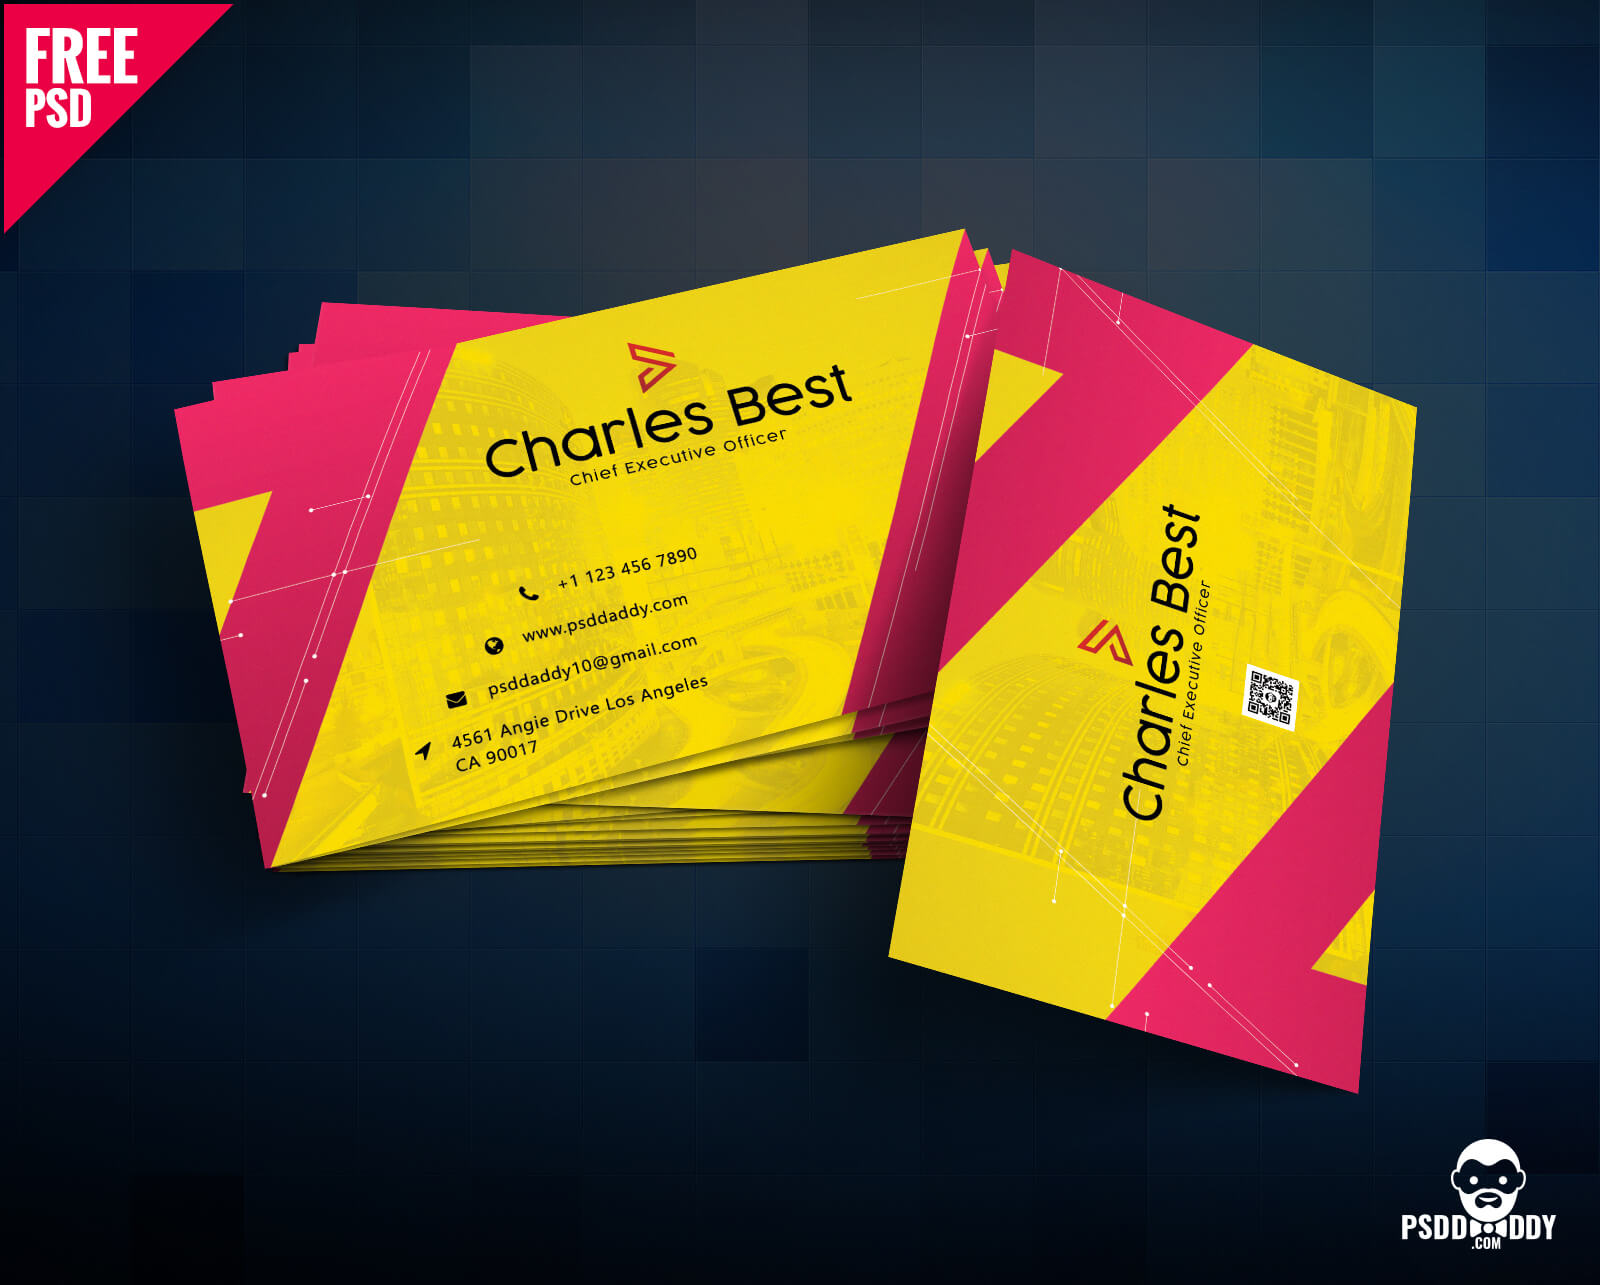 Download] Creative Business Card Free Psd | Psddaddy In Business Card Size Photoshop Template